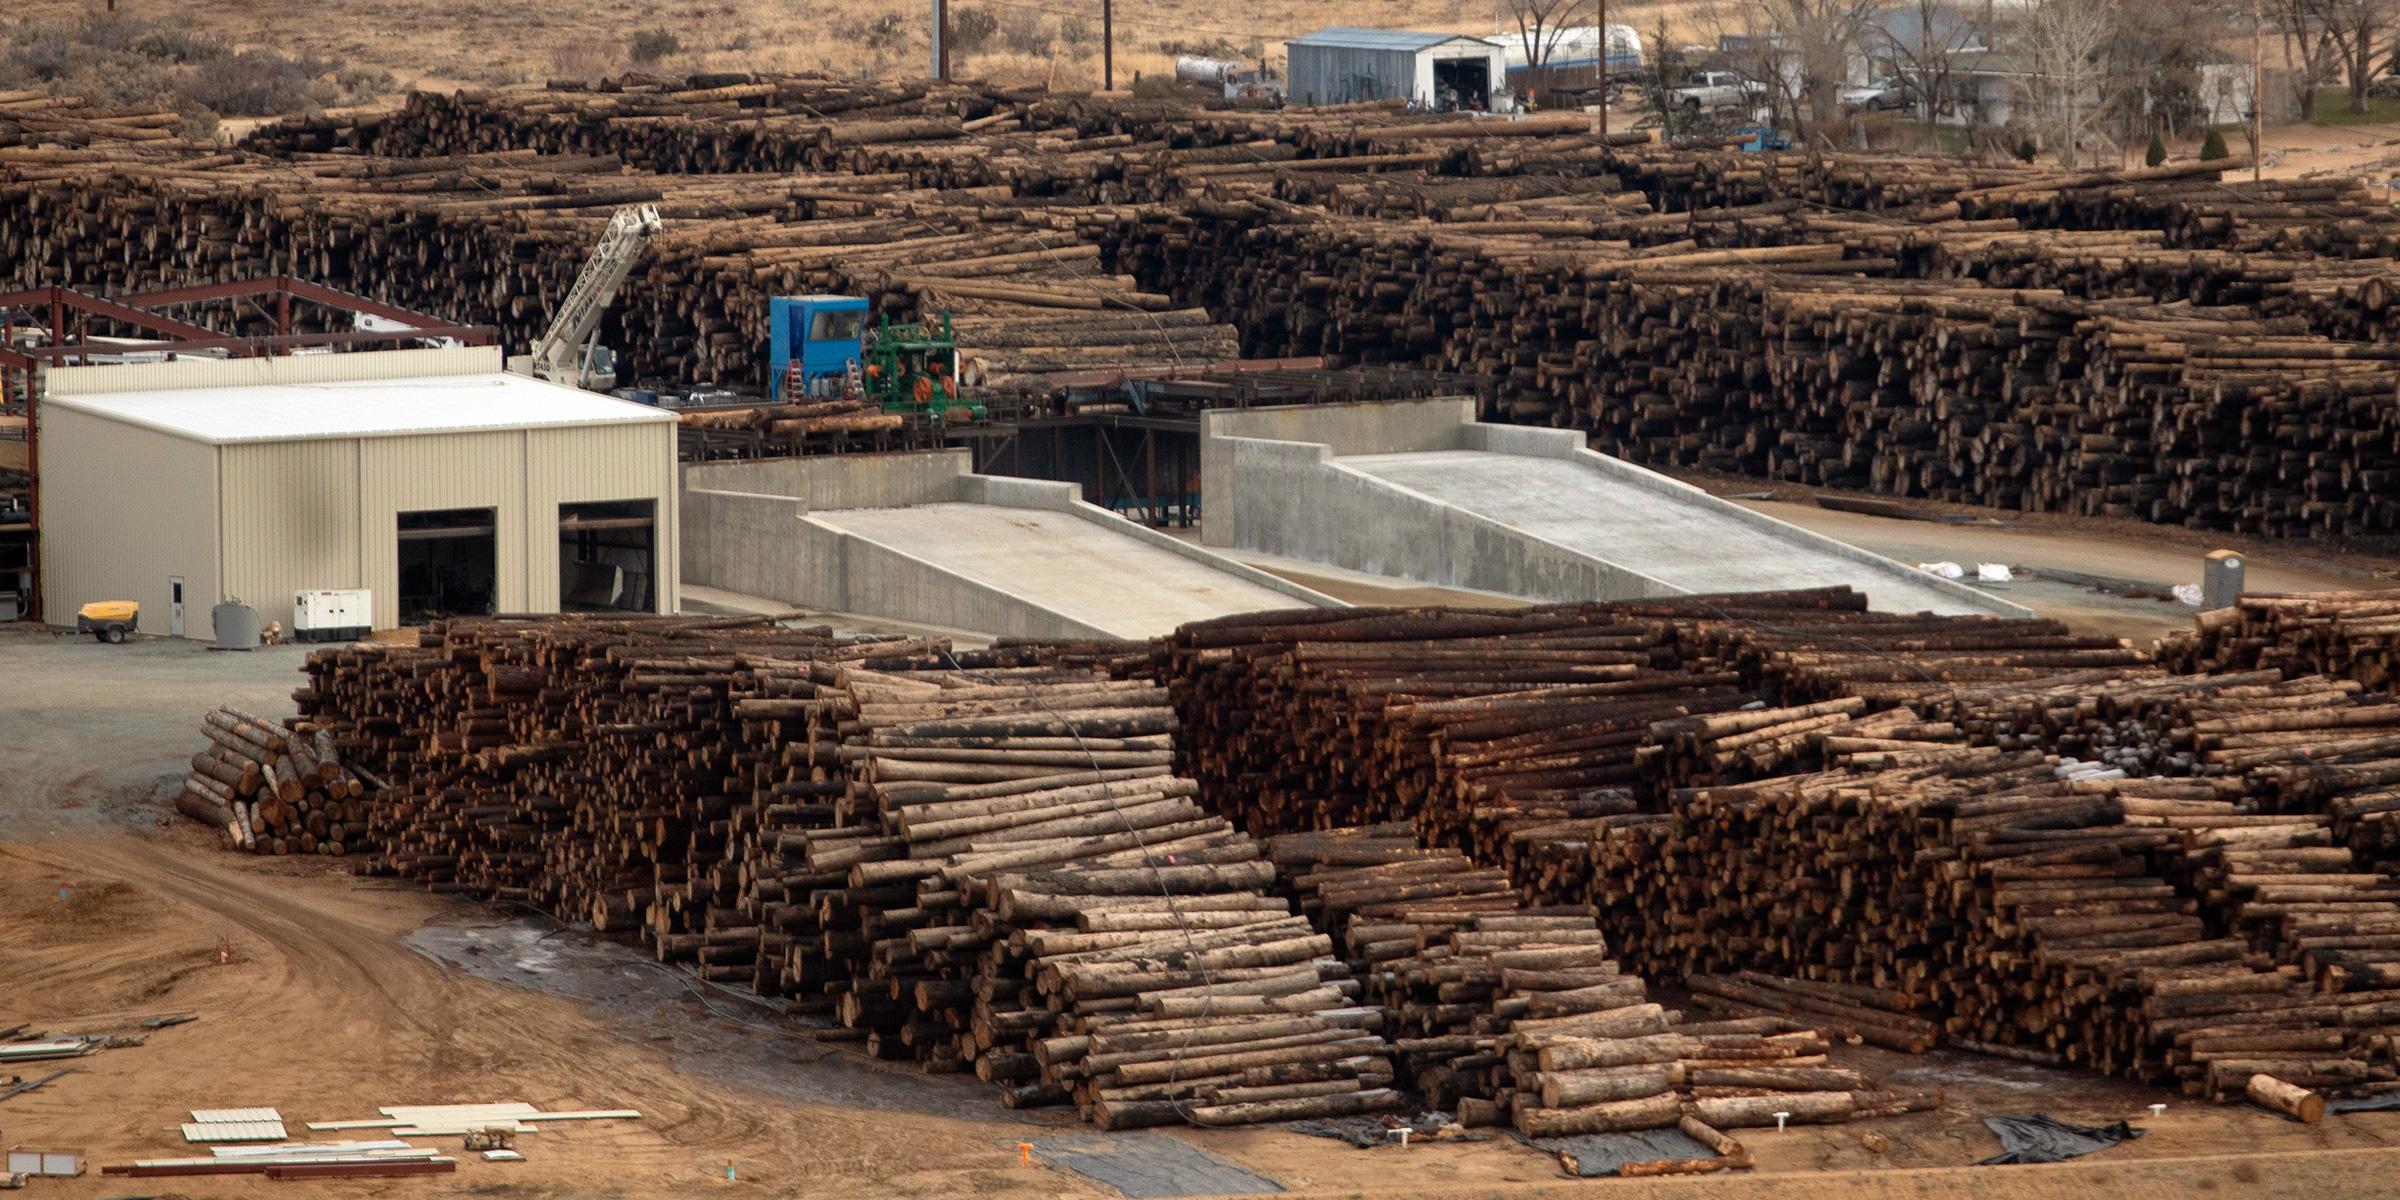 Stacks of logs at a sawmill